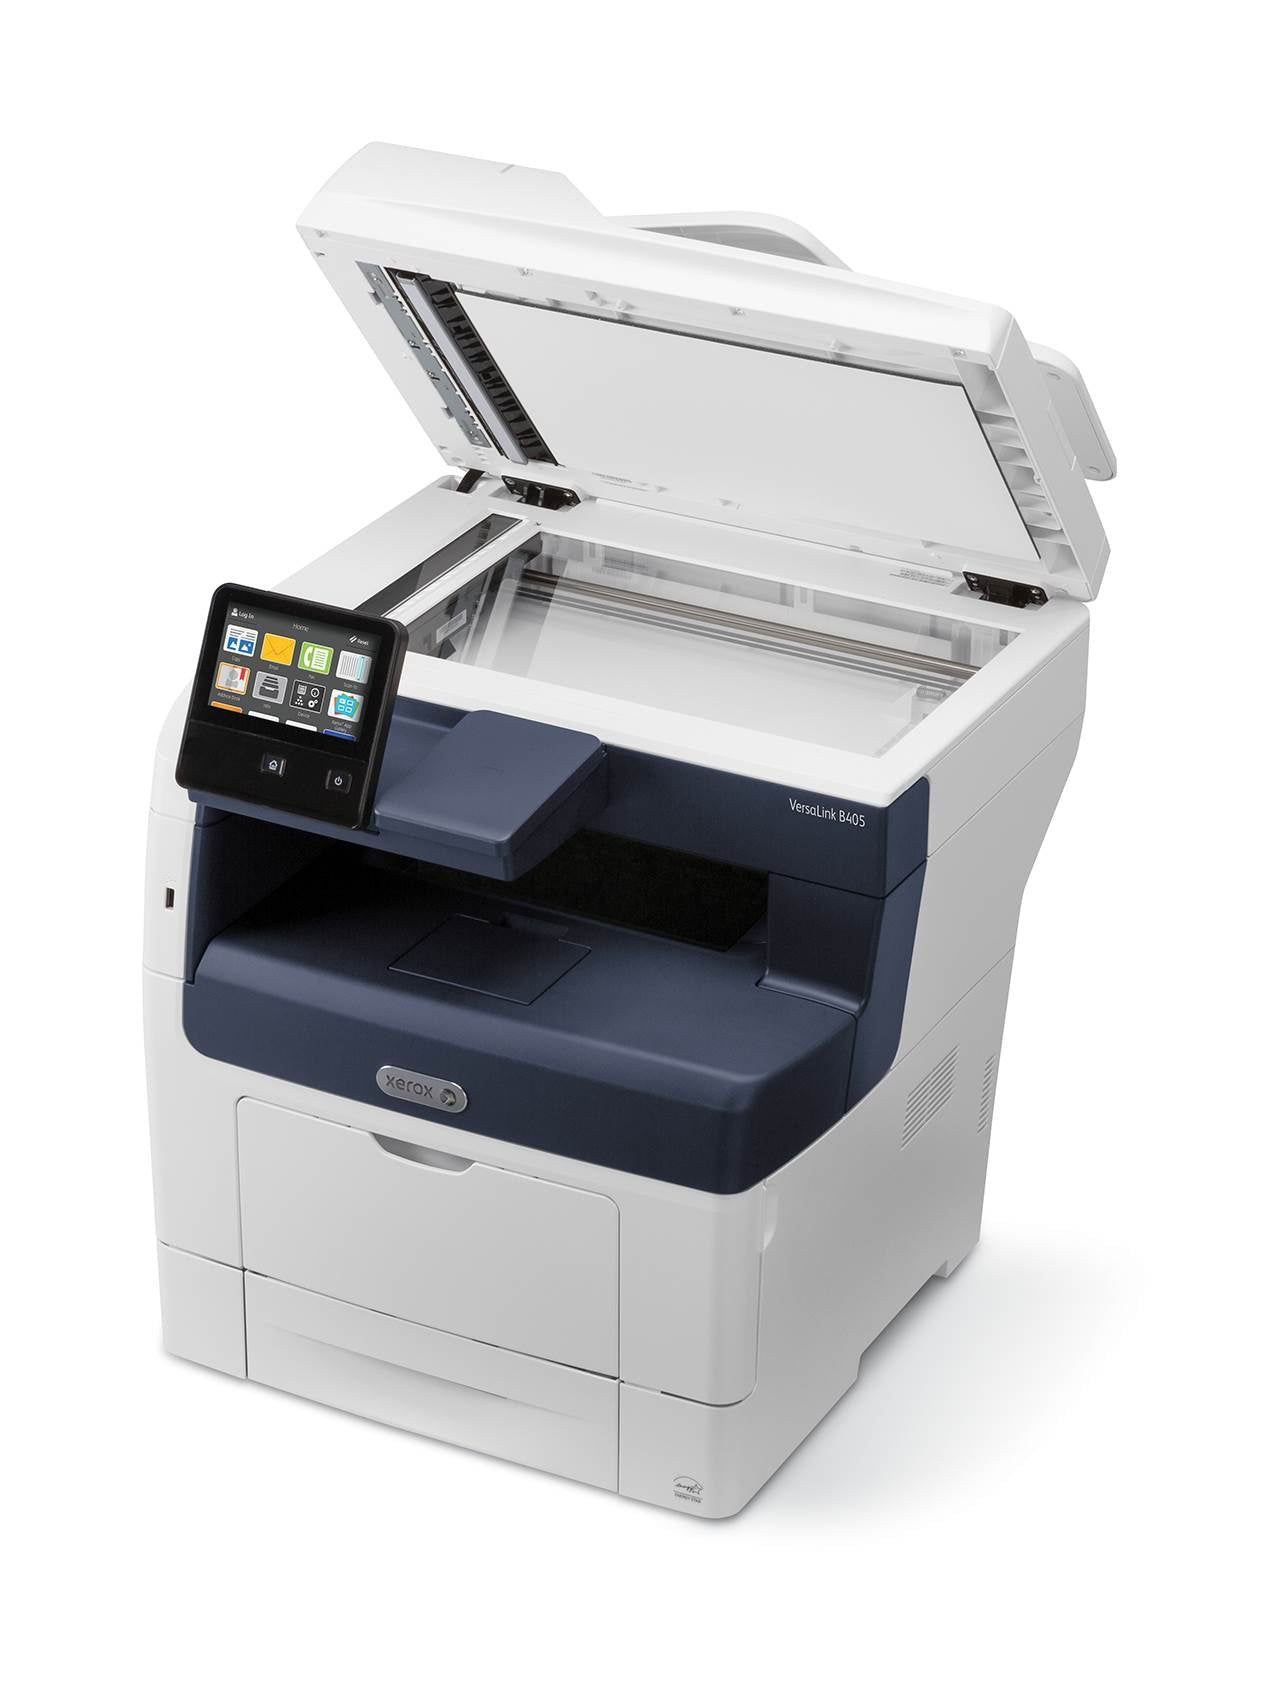 Xerox VersaLink B405DN B405/DN Monochrome Office Laser Multifunction Printer, Copy /Print /Scan /Fax With Support For Letter/Legal